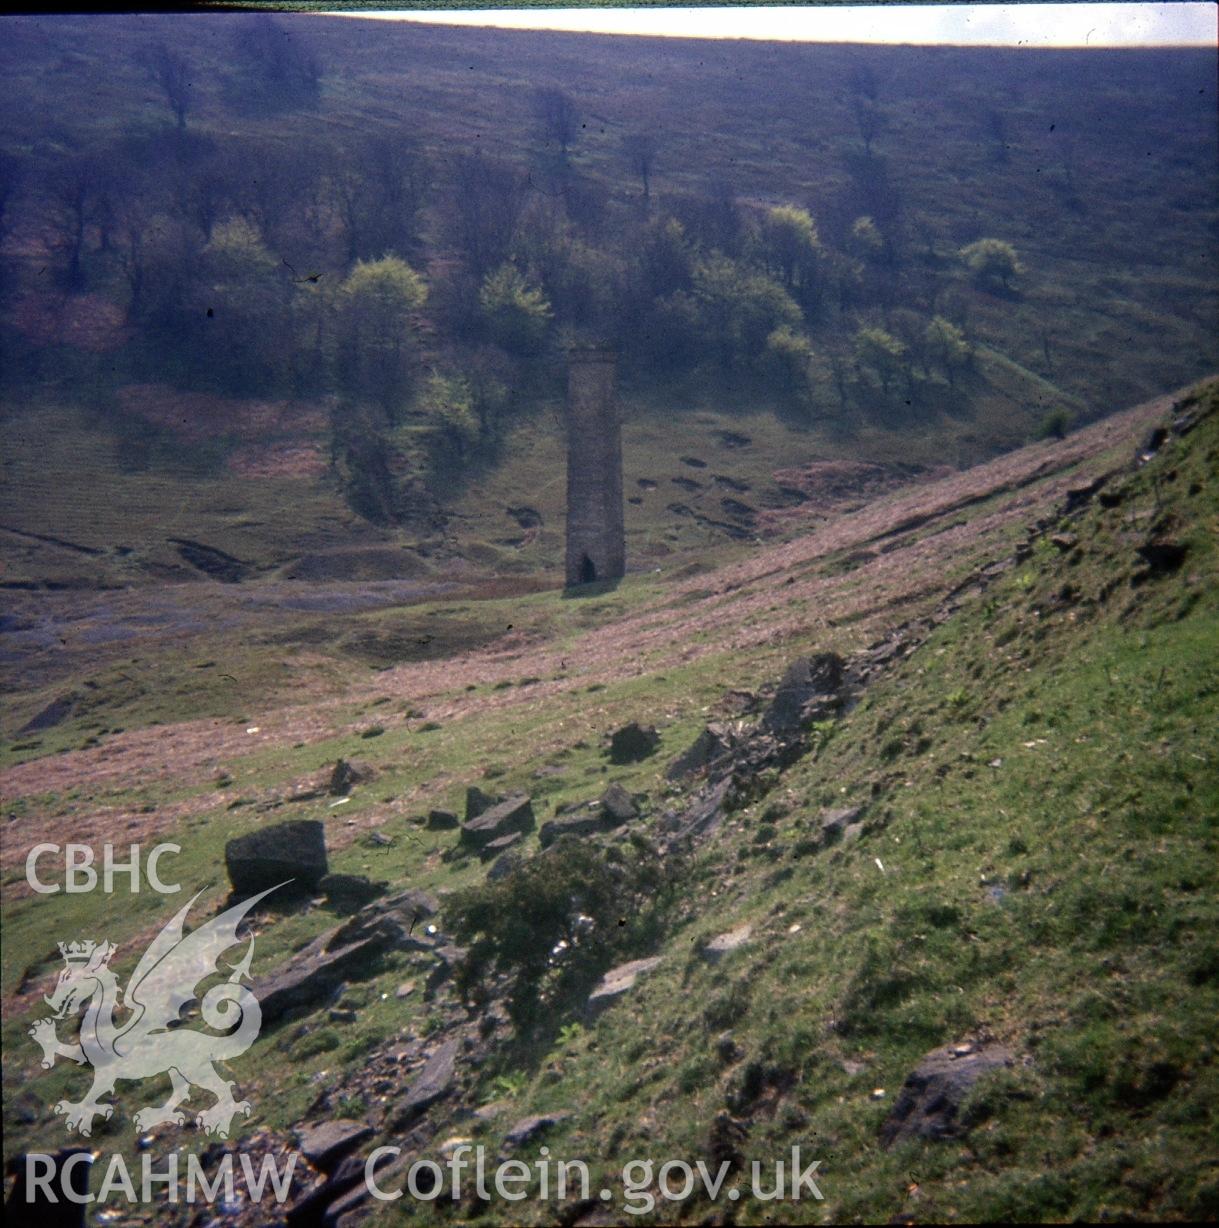 Digital photograph showing Cwmbyrgwm colliery remains, taken 1975